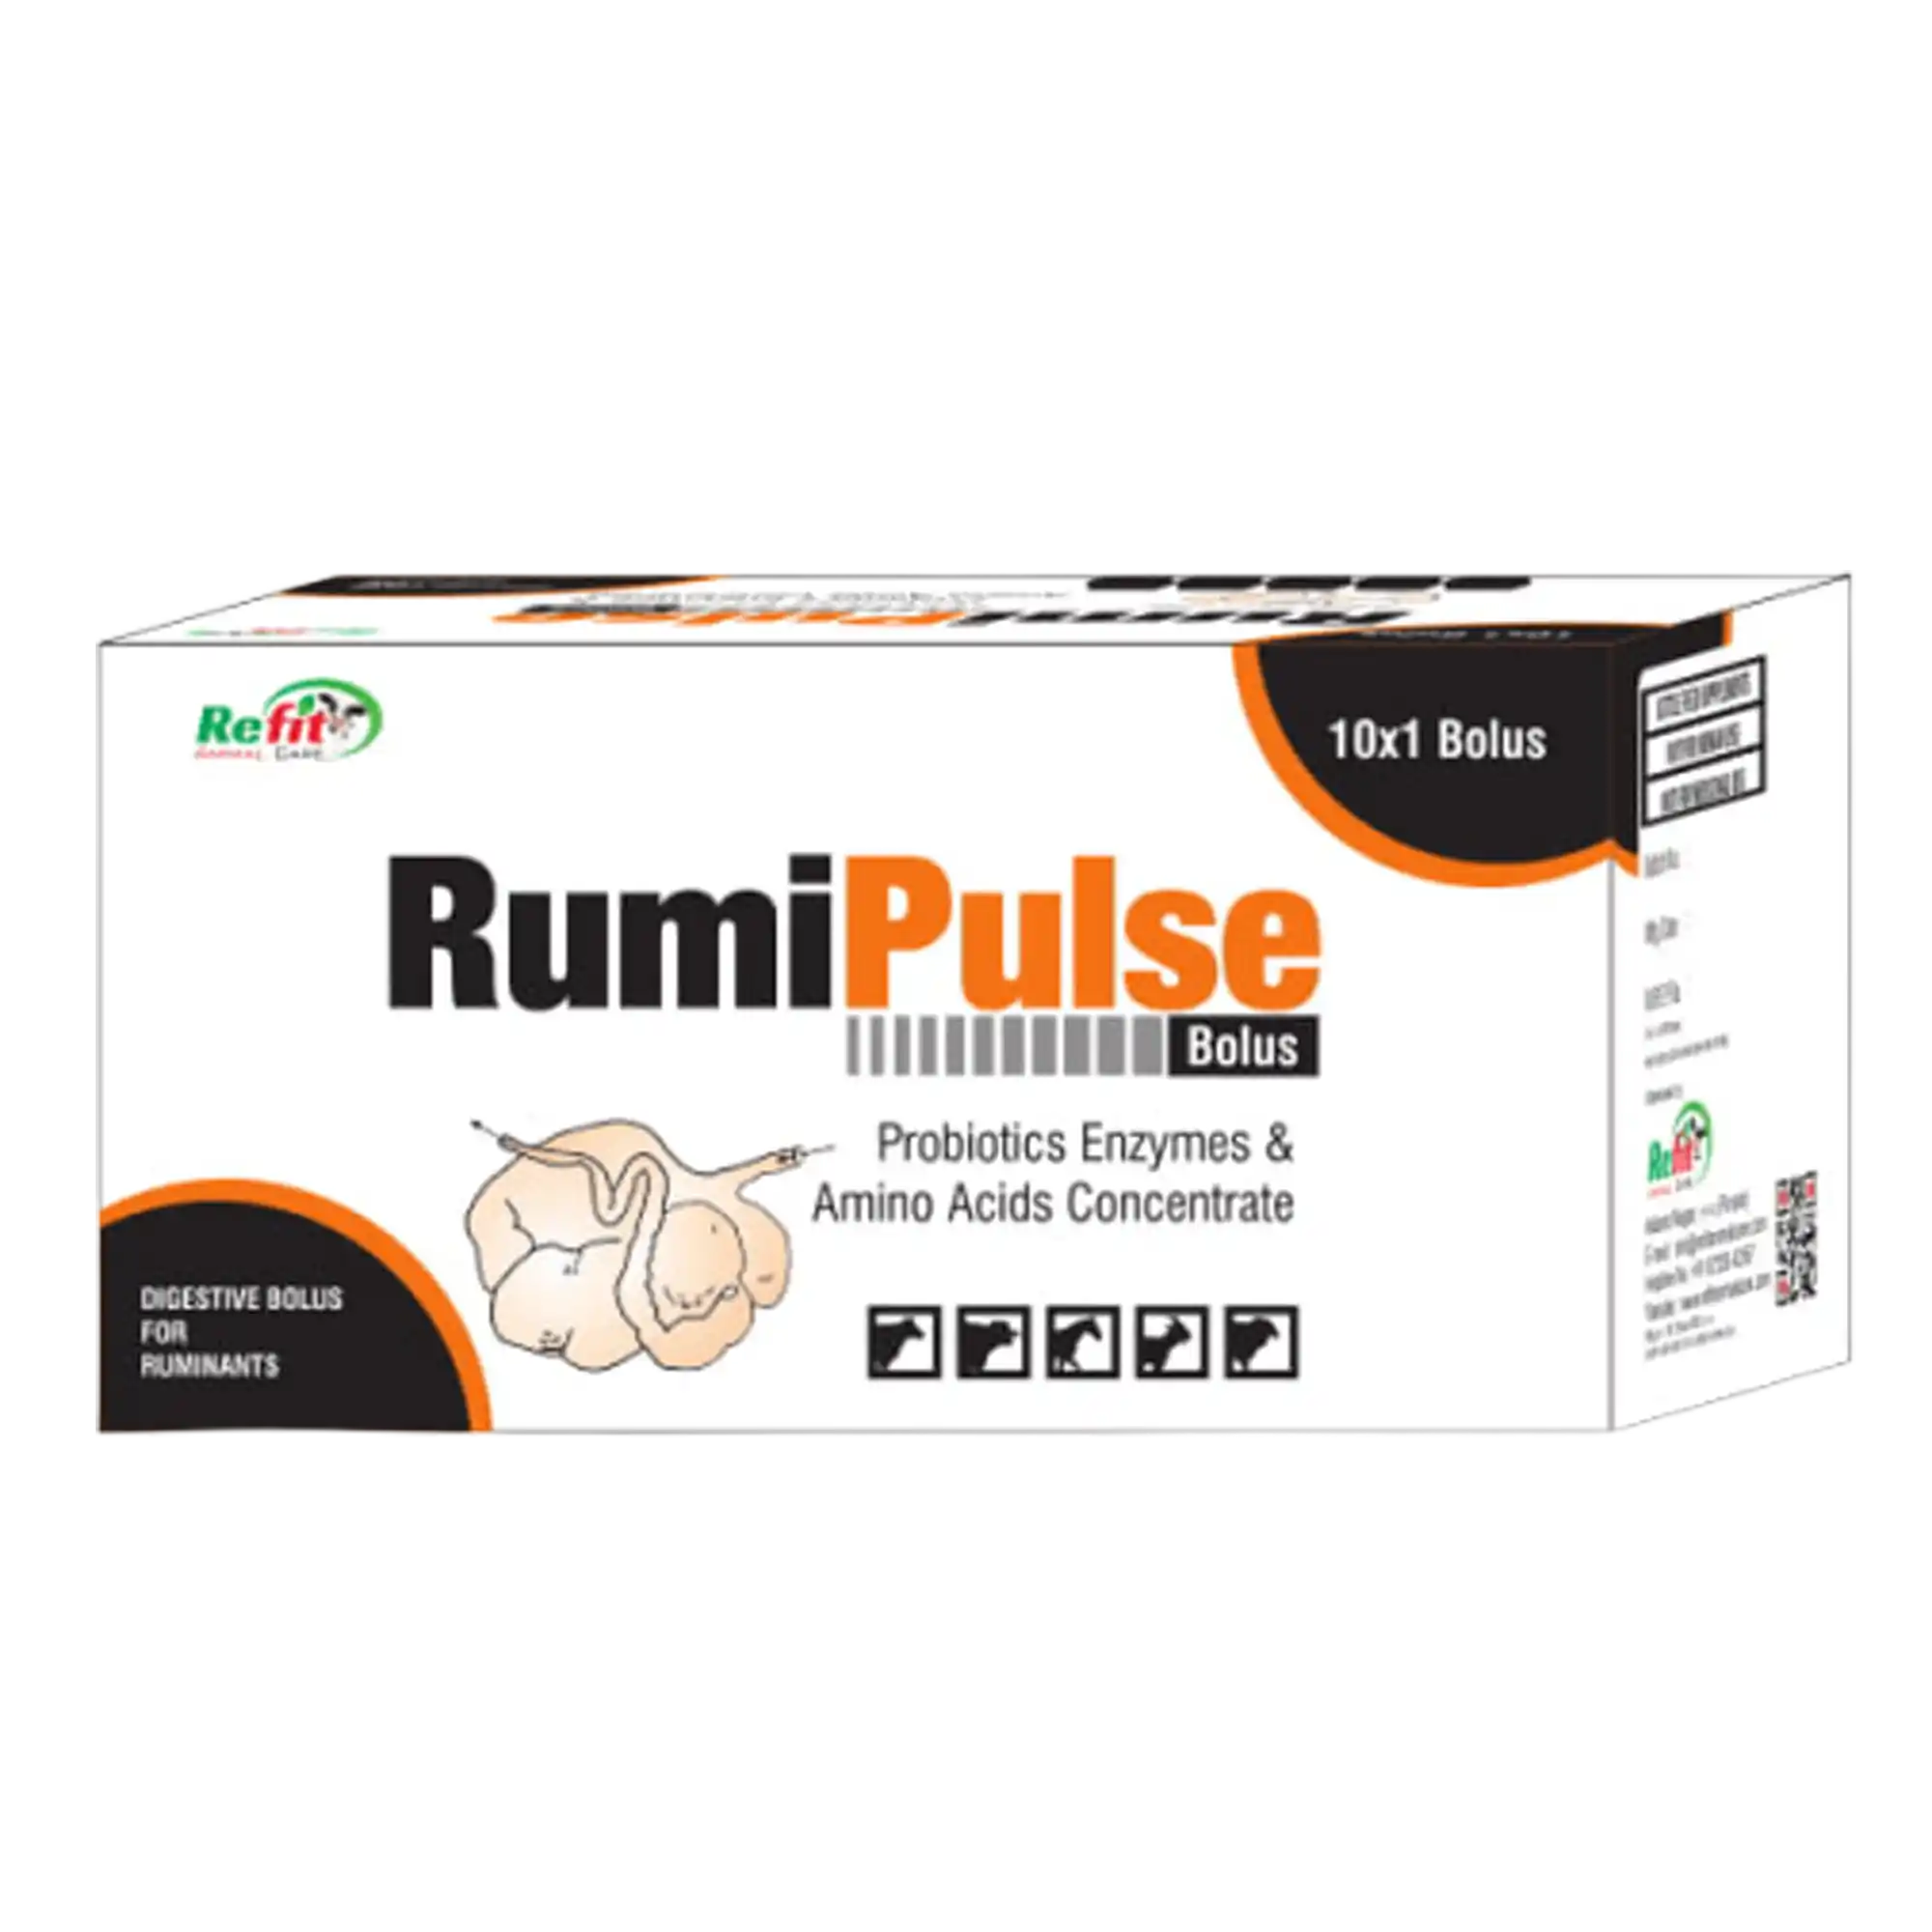 Image of Refit Animal Care Product veterinary rumen bolus for cattle cows and buffalo